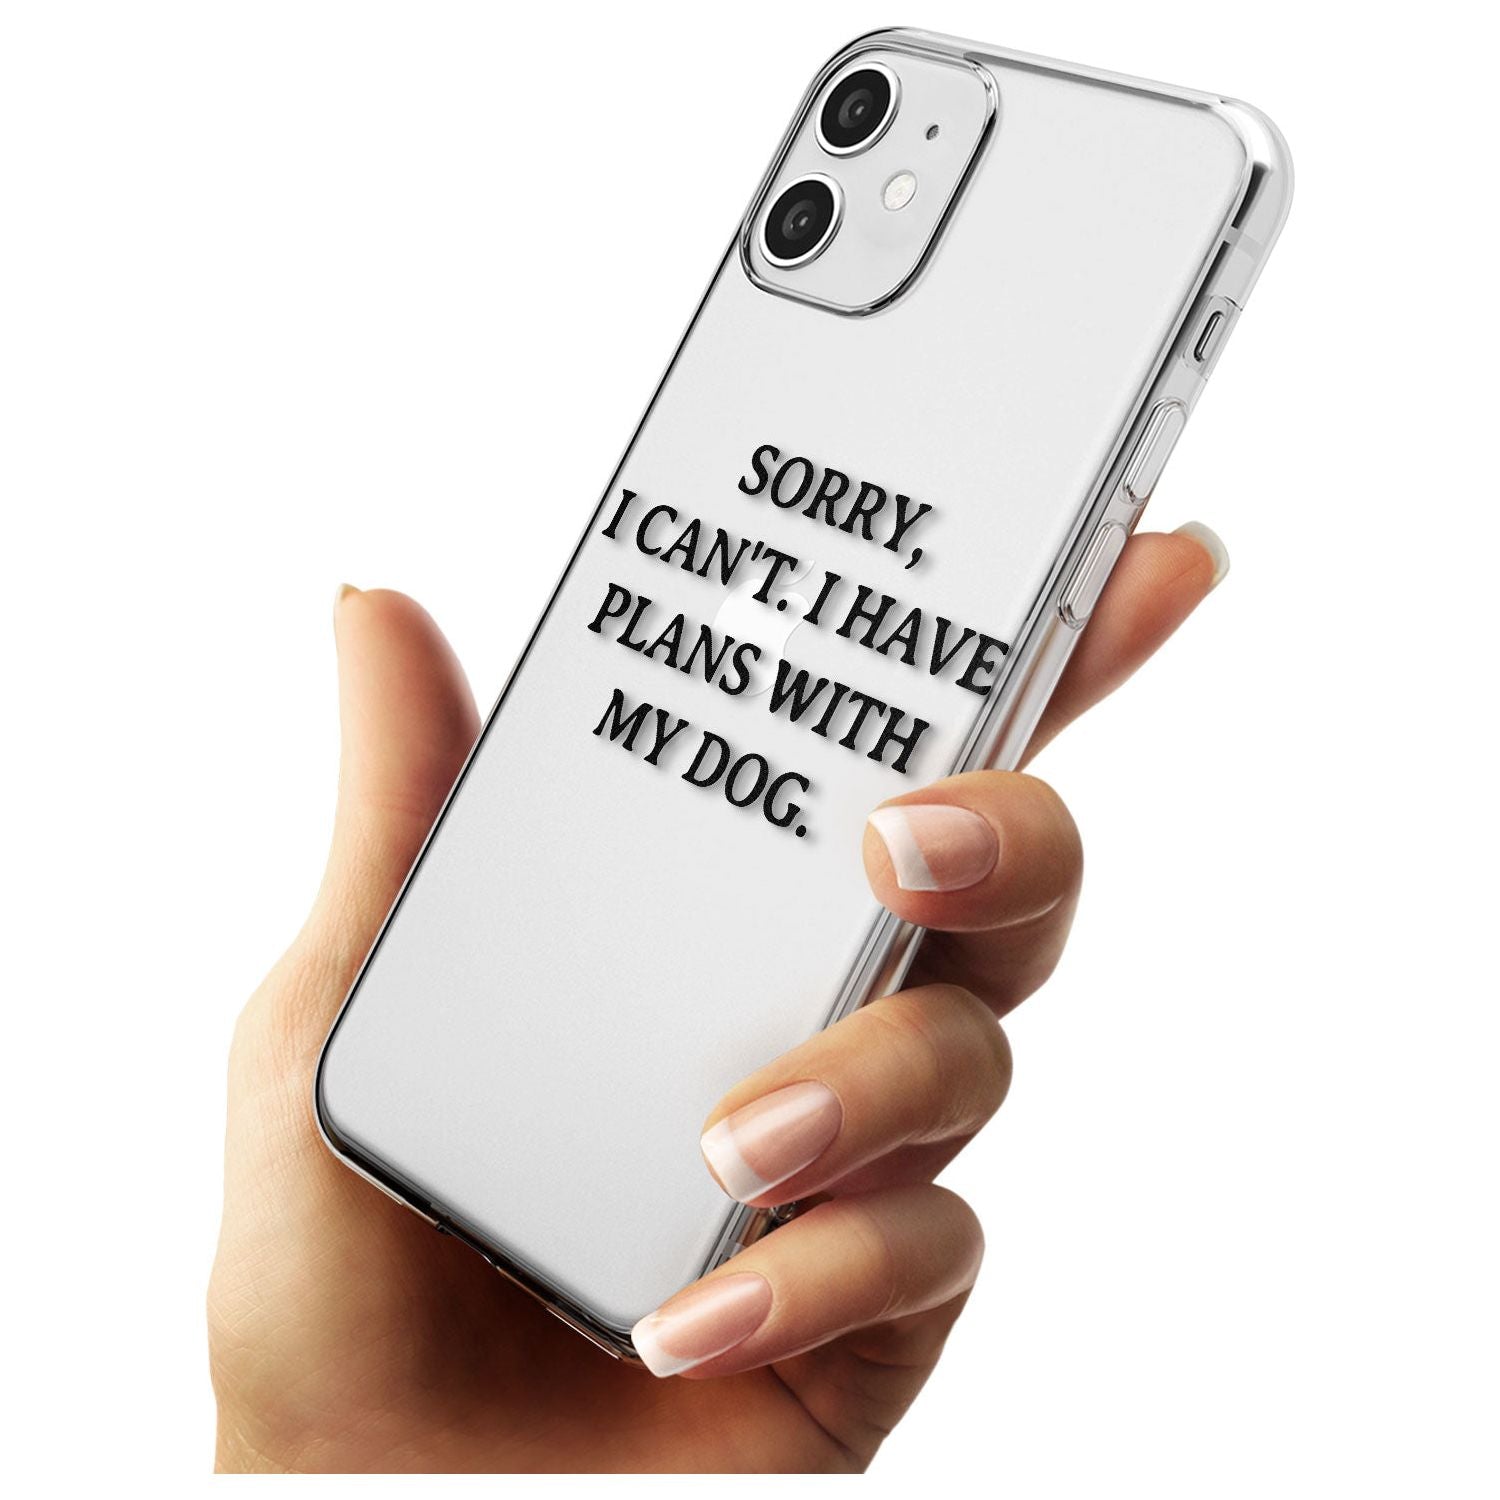 Plans with Dog Slim TPU Phone Case for iPhone 11